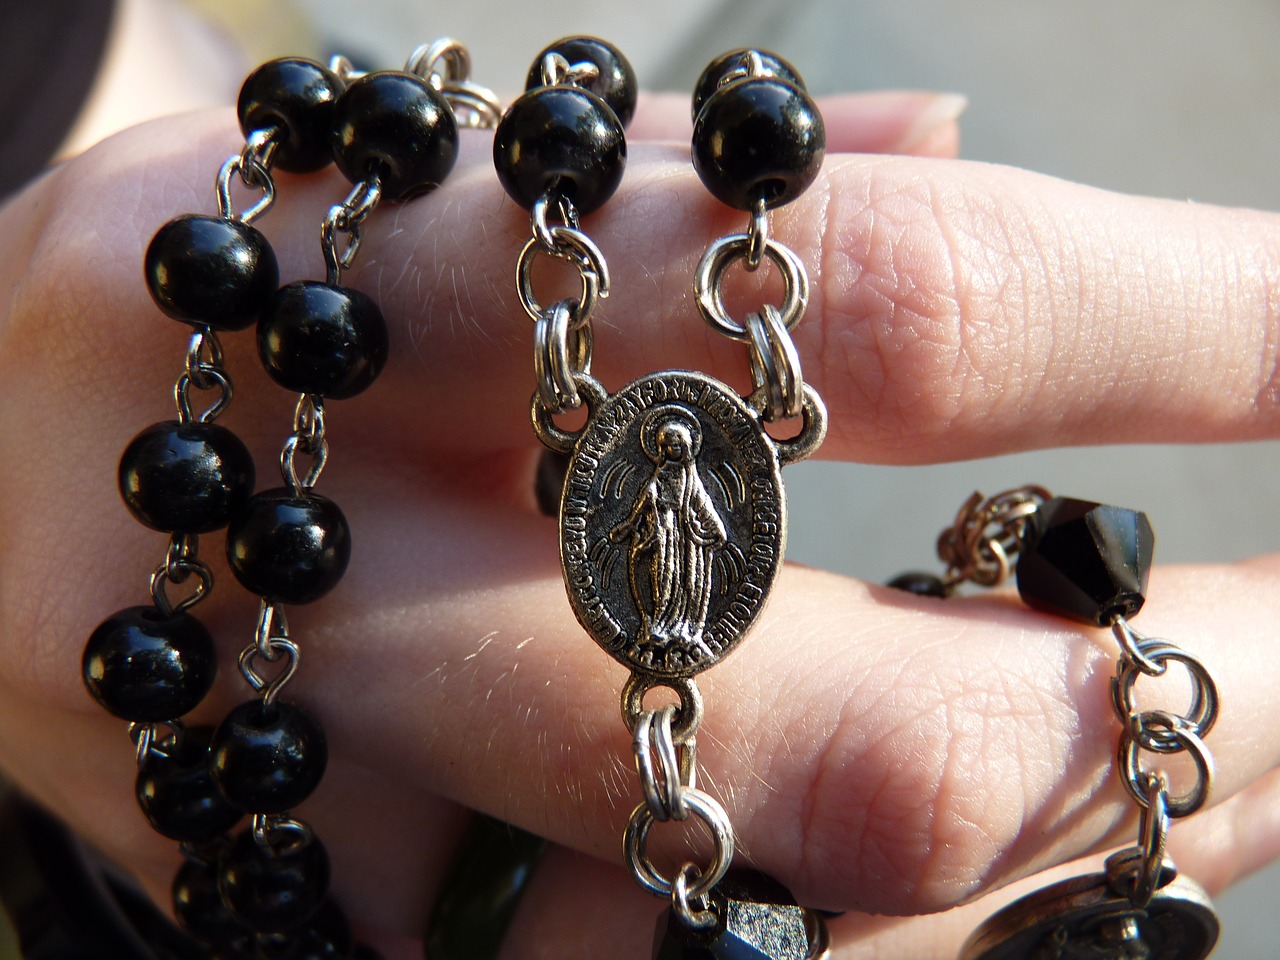 Rosary entwined on hand